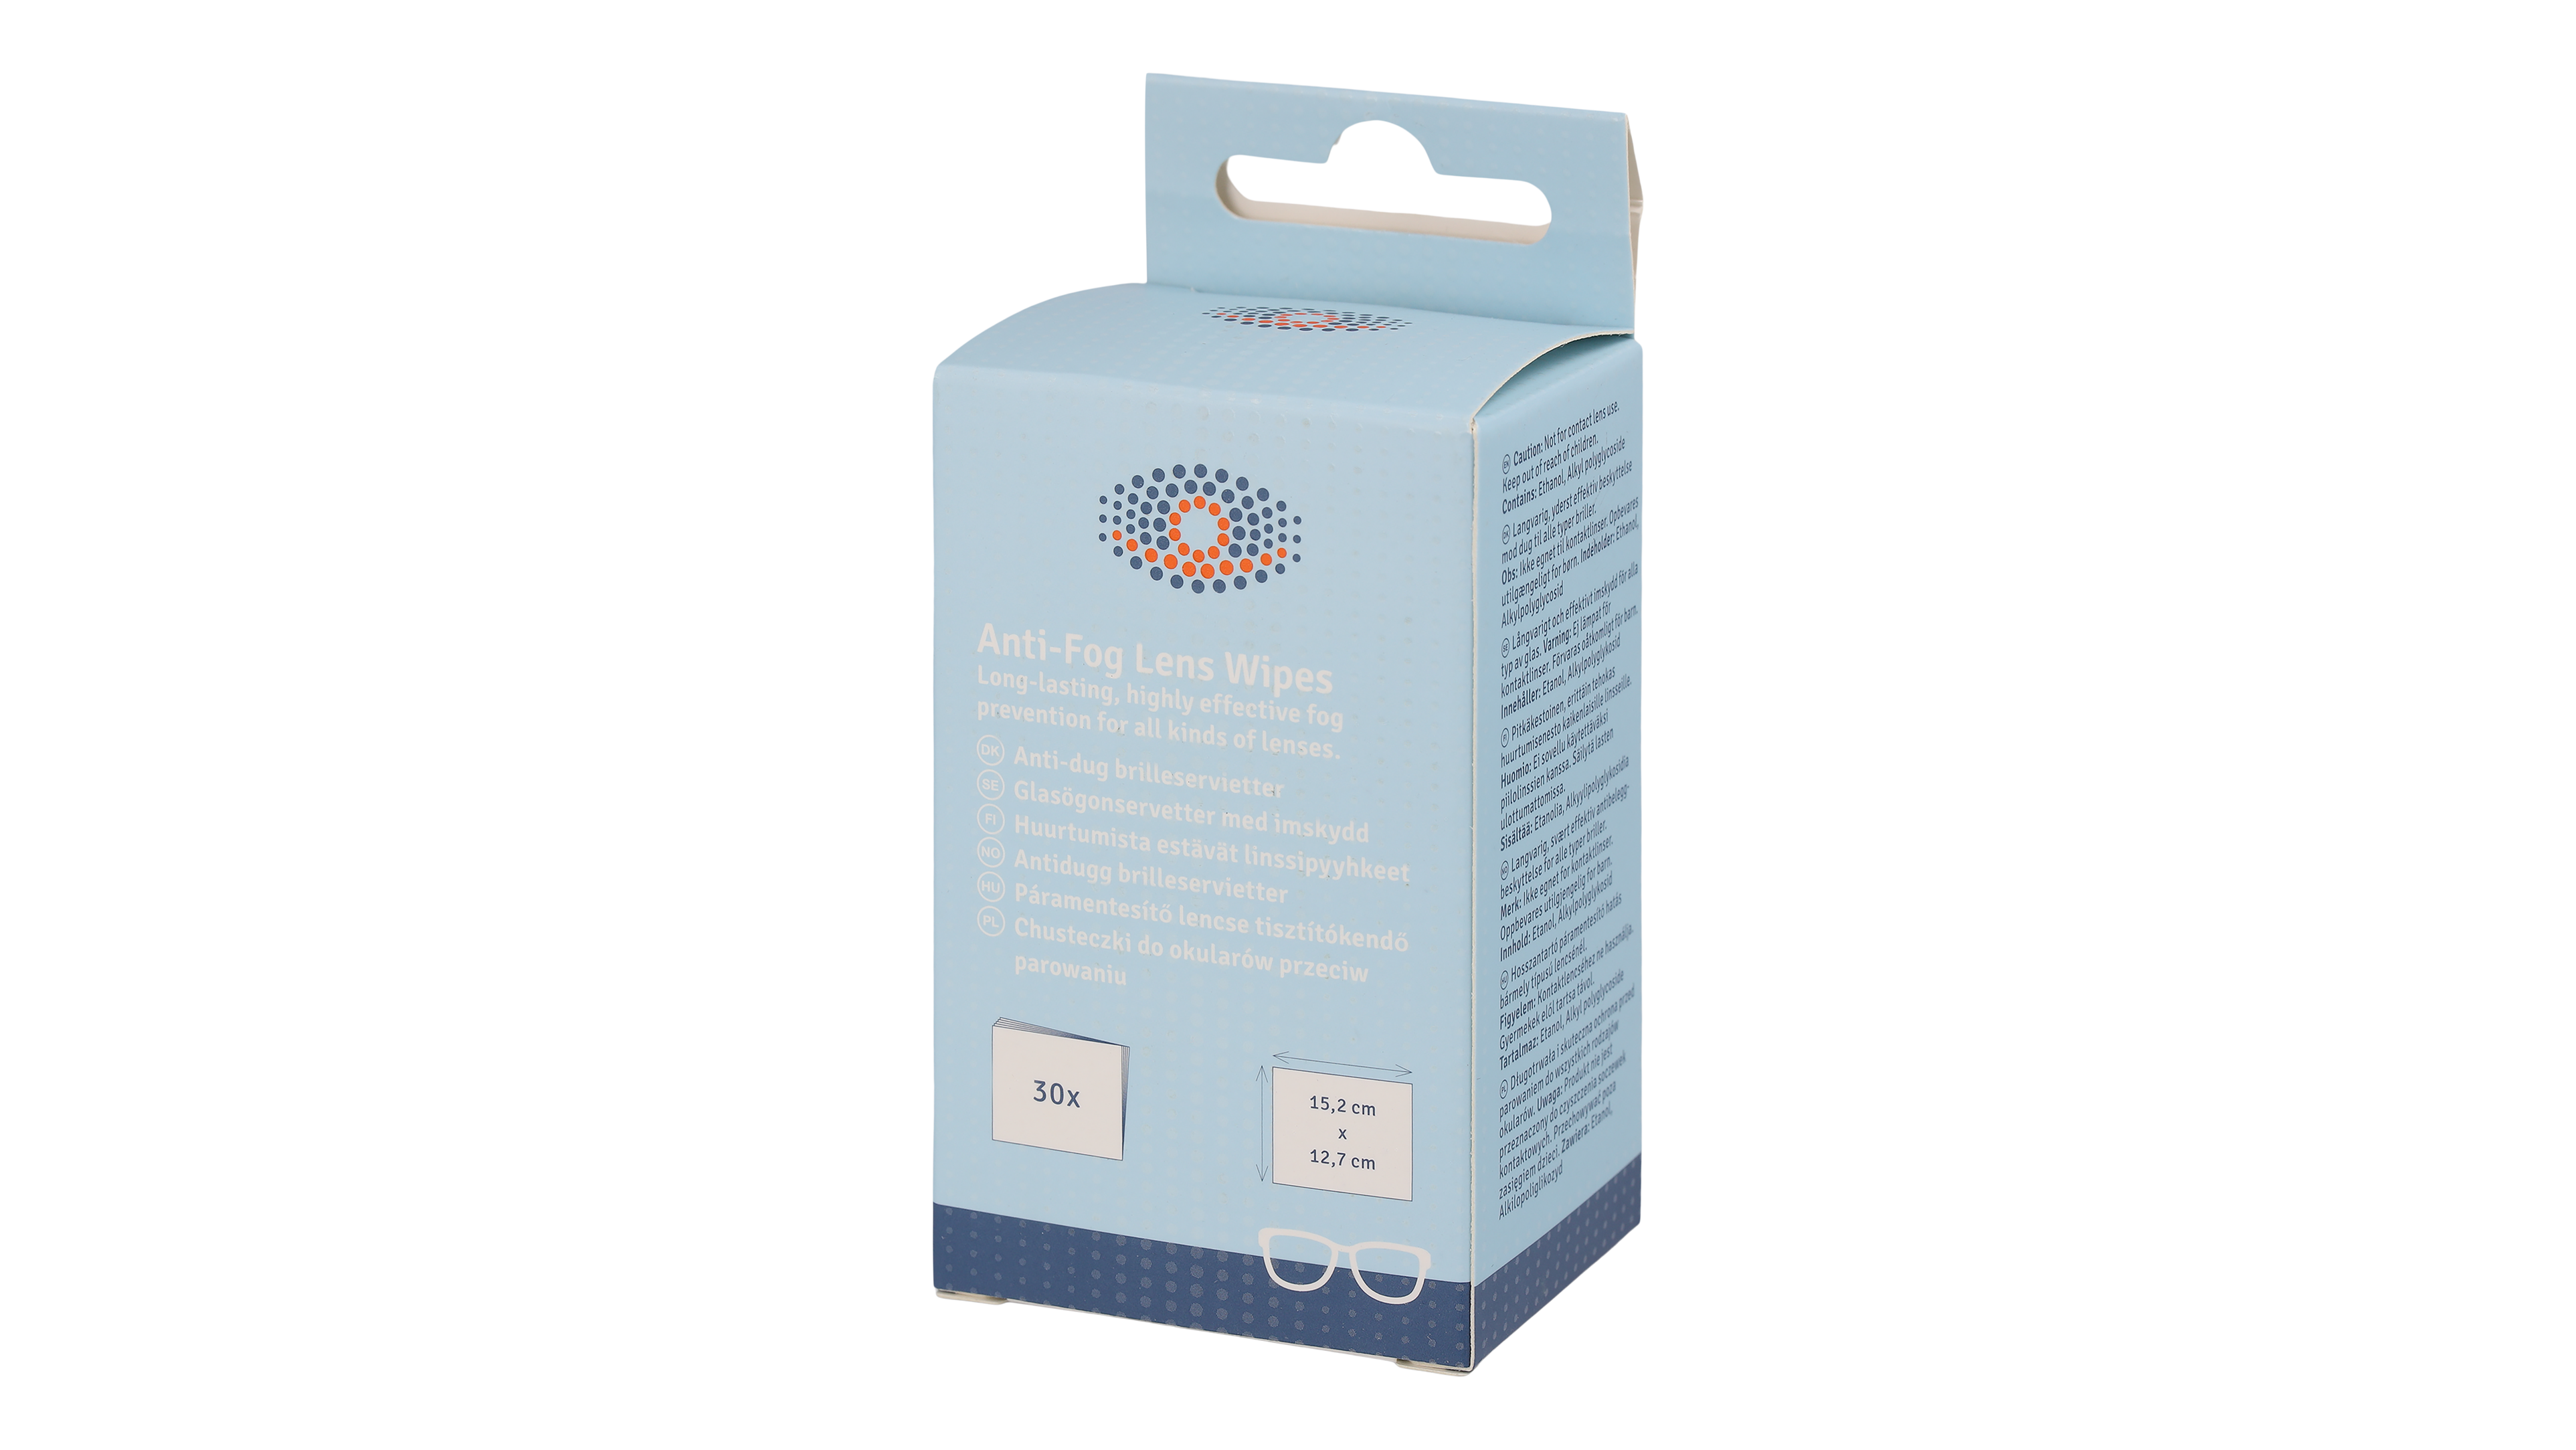 [products.image.angle_left01] Vision Express Anti-Fog Lens Wipes 30 Pack